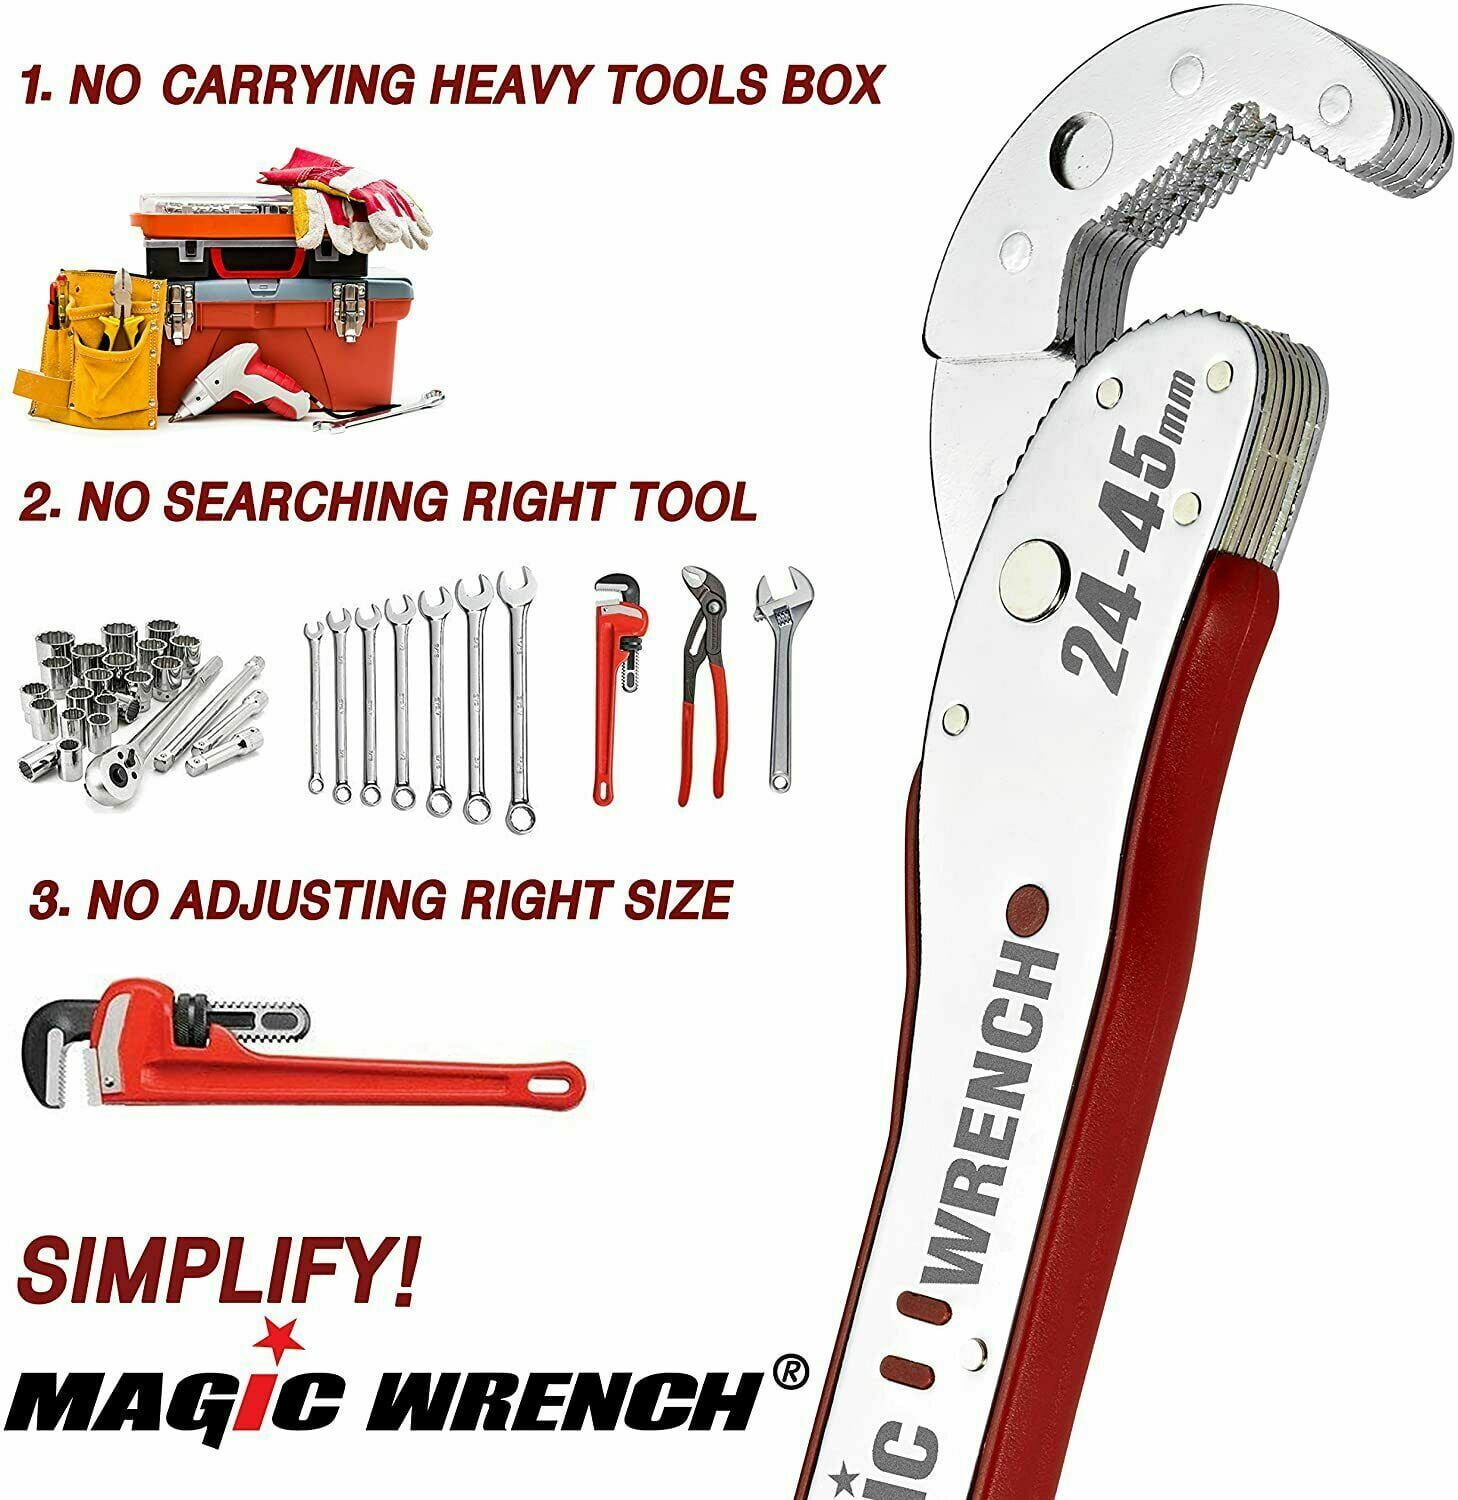 New Magic Wrench Adjustable Hand Self Spanner Universal Grip DIY Tools 9mm~45mm 